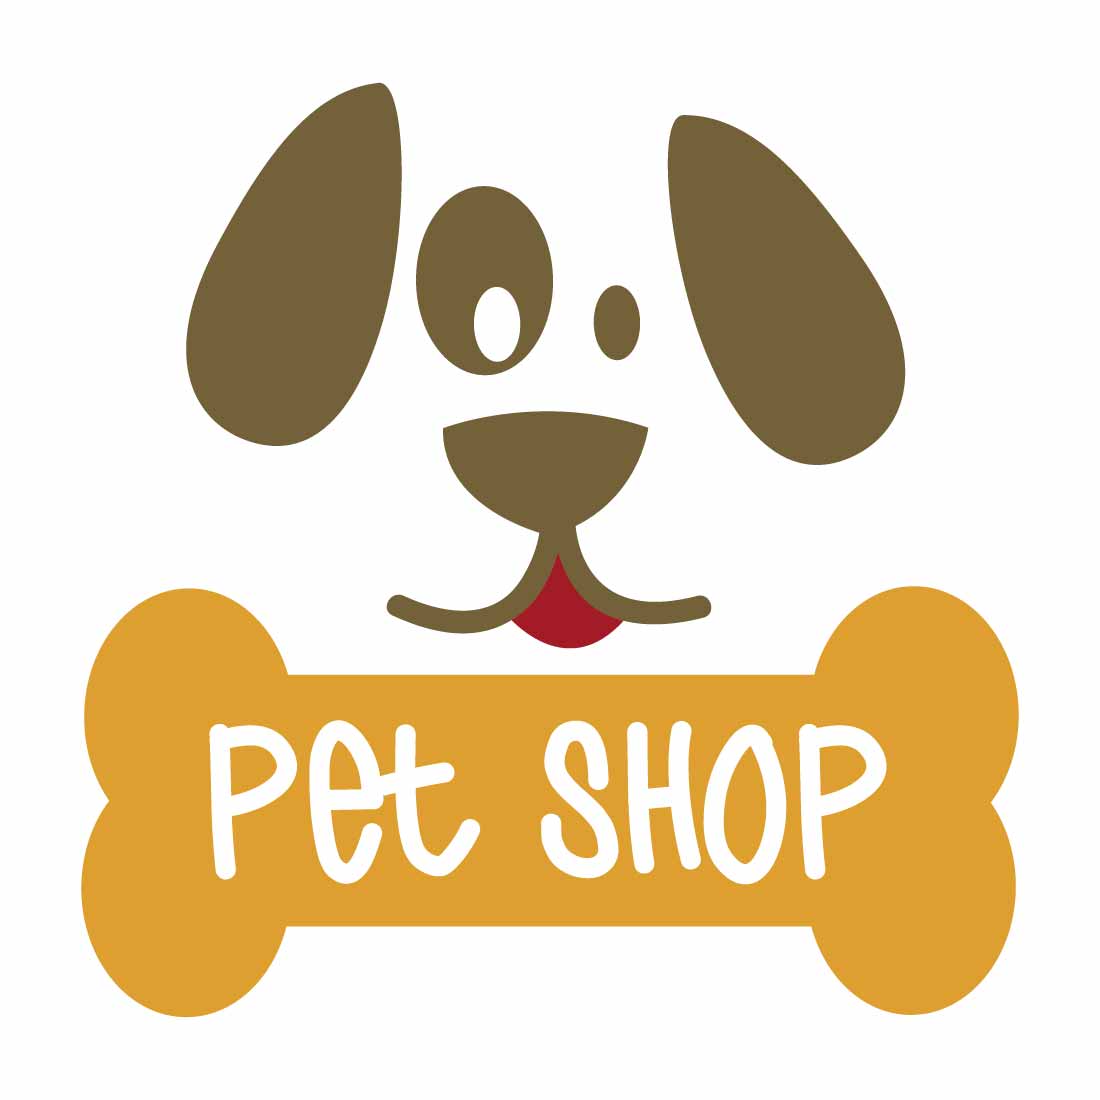 Dog and bone logo for petshop or veterinary cover image.